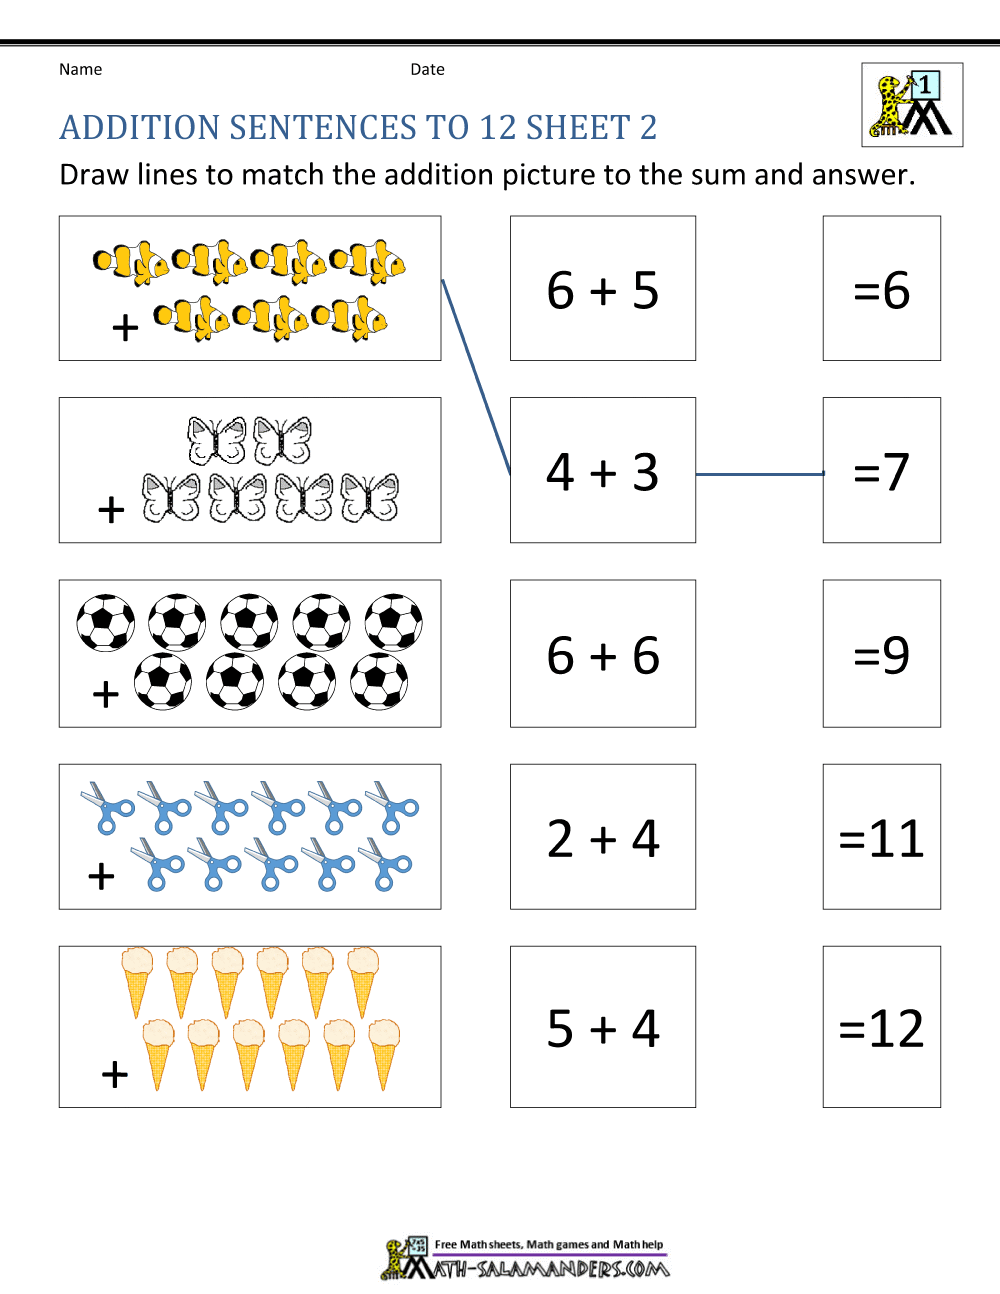 89 MATH SHEETS FOR GRADE 1 ADDITION